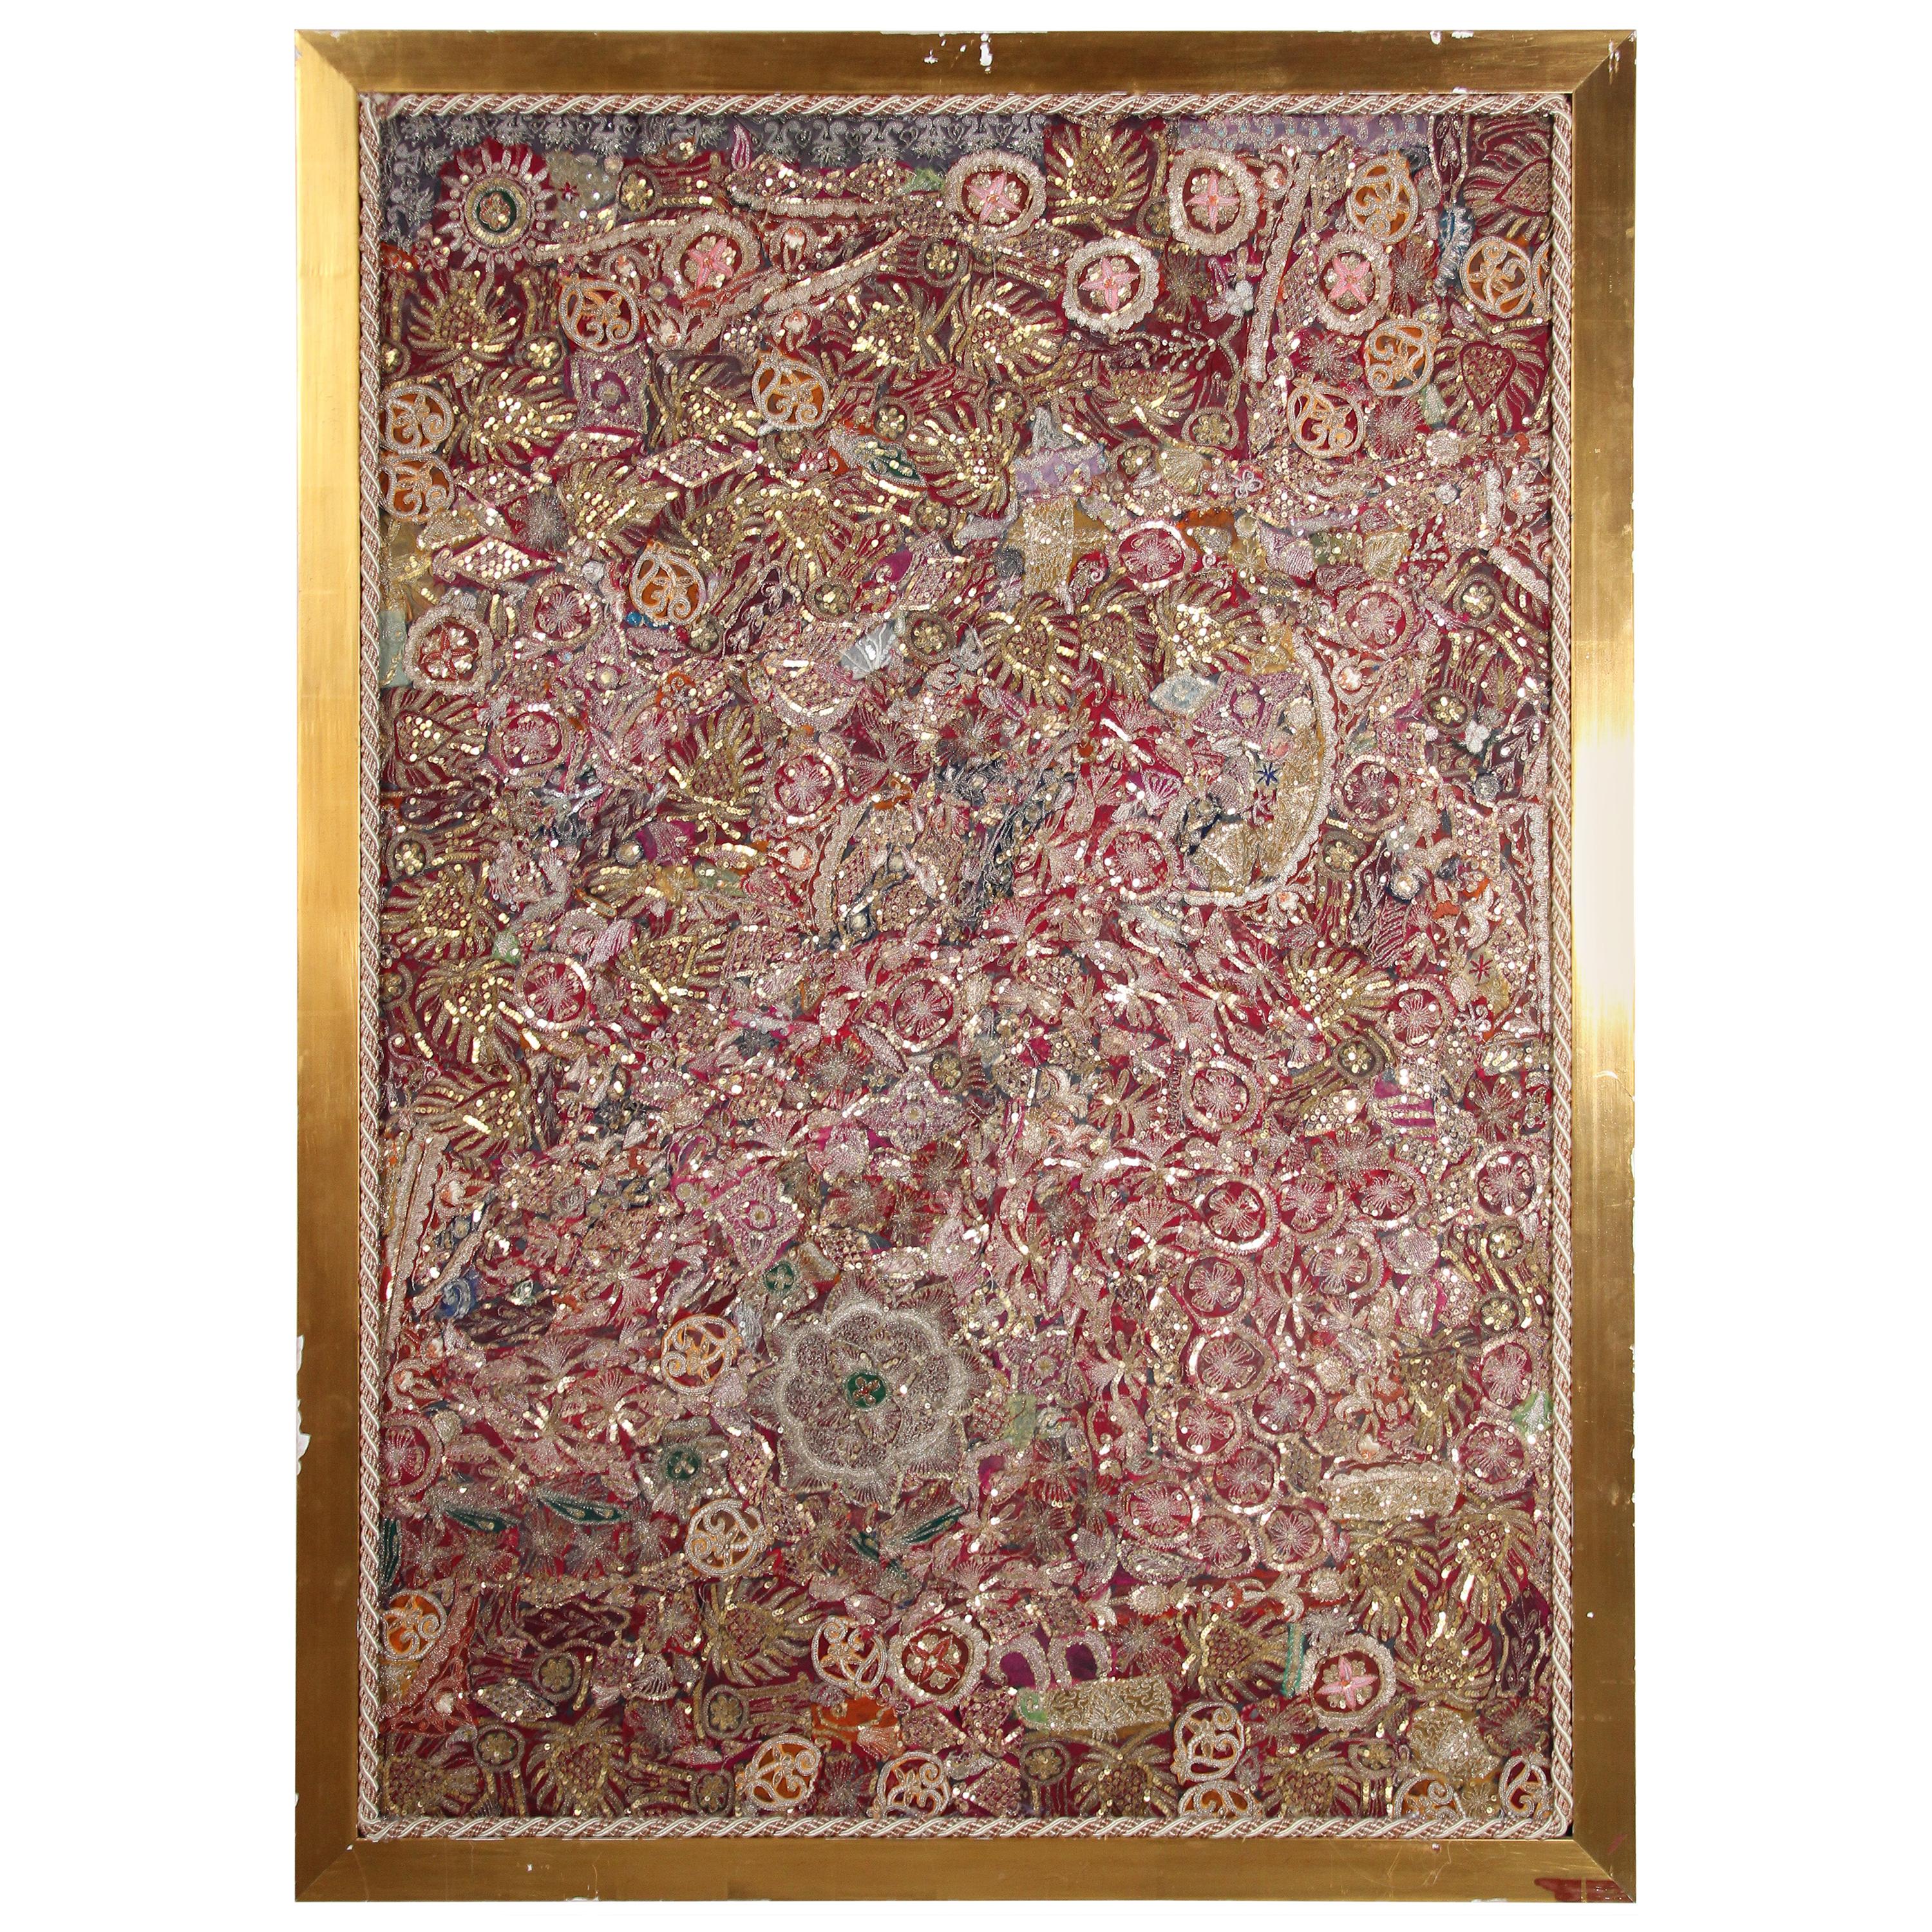 Mughal Embroidered Metal Threaded Tapestry from Rajasthan Framed